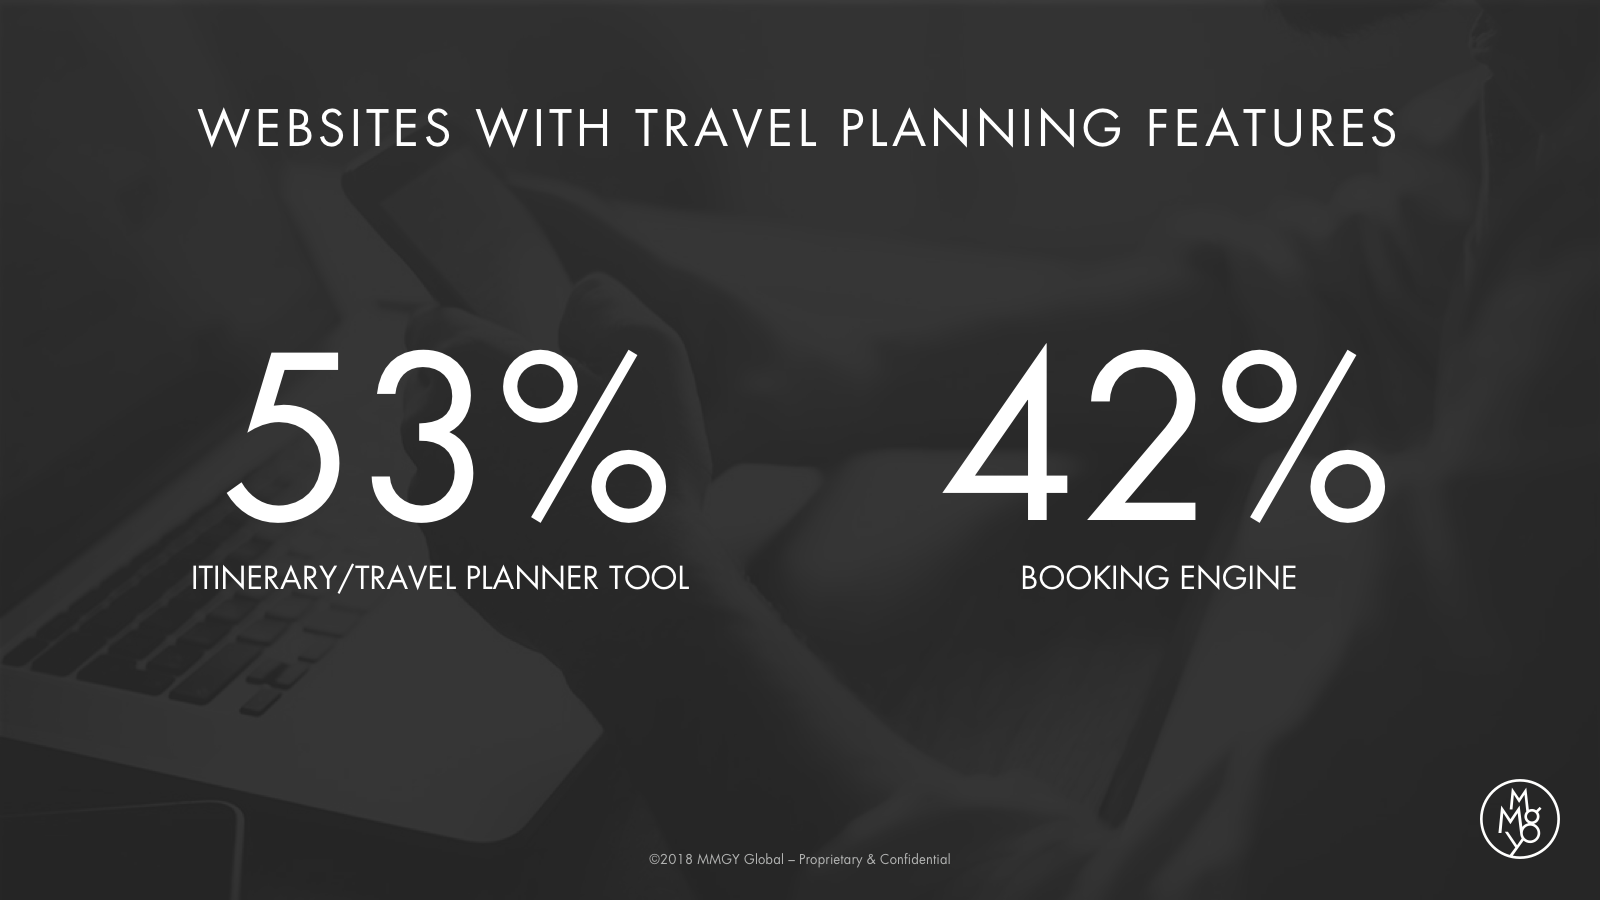 Websites with Travel Planning Features Statistics